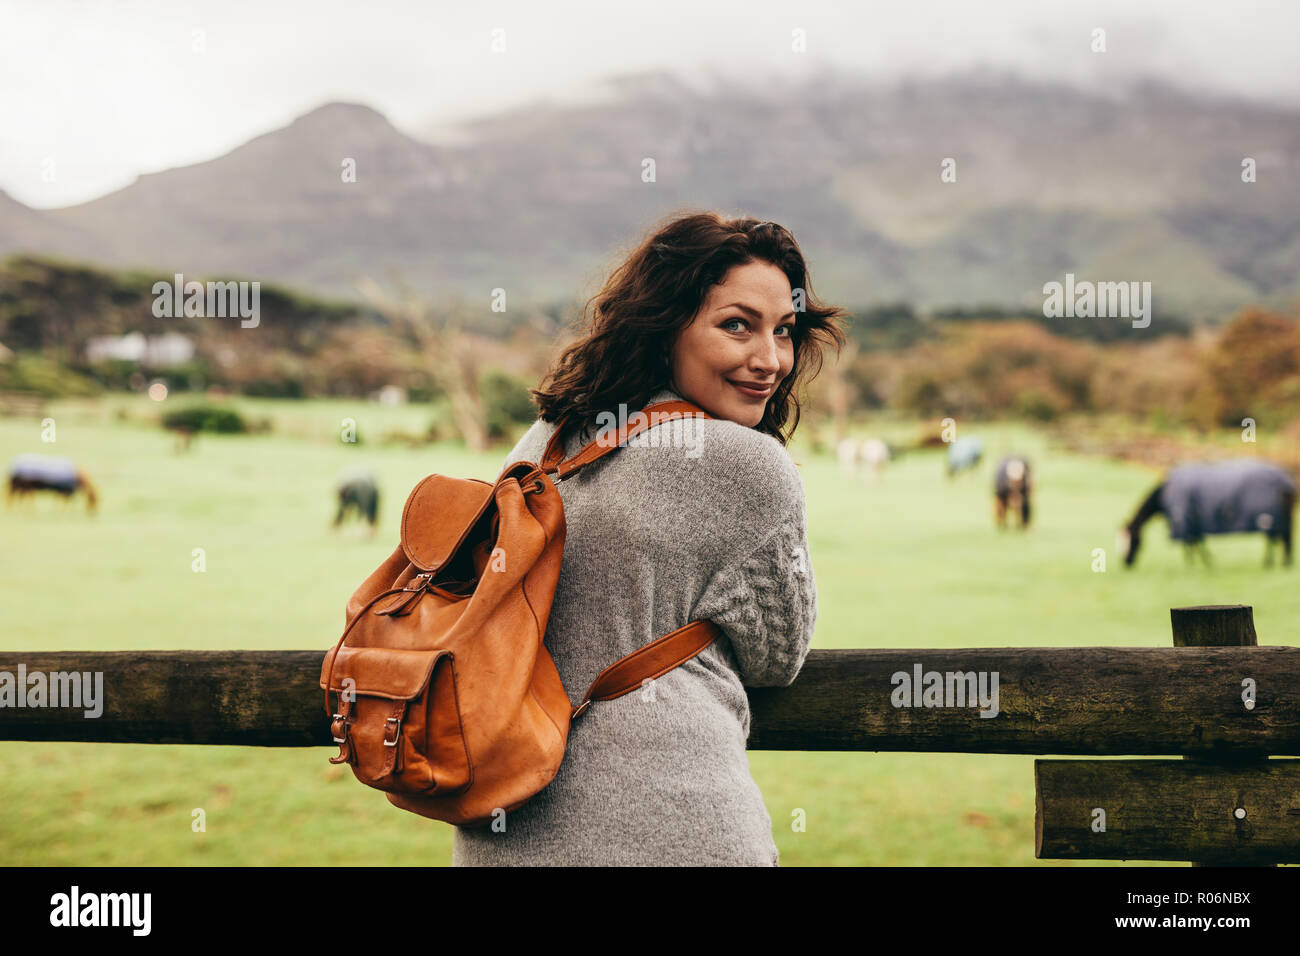 Rear view of woman standing by wooden fence and looking back at camera with horses in background. Female standing by ranch fence. Stock Photo